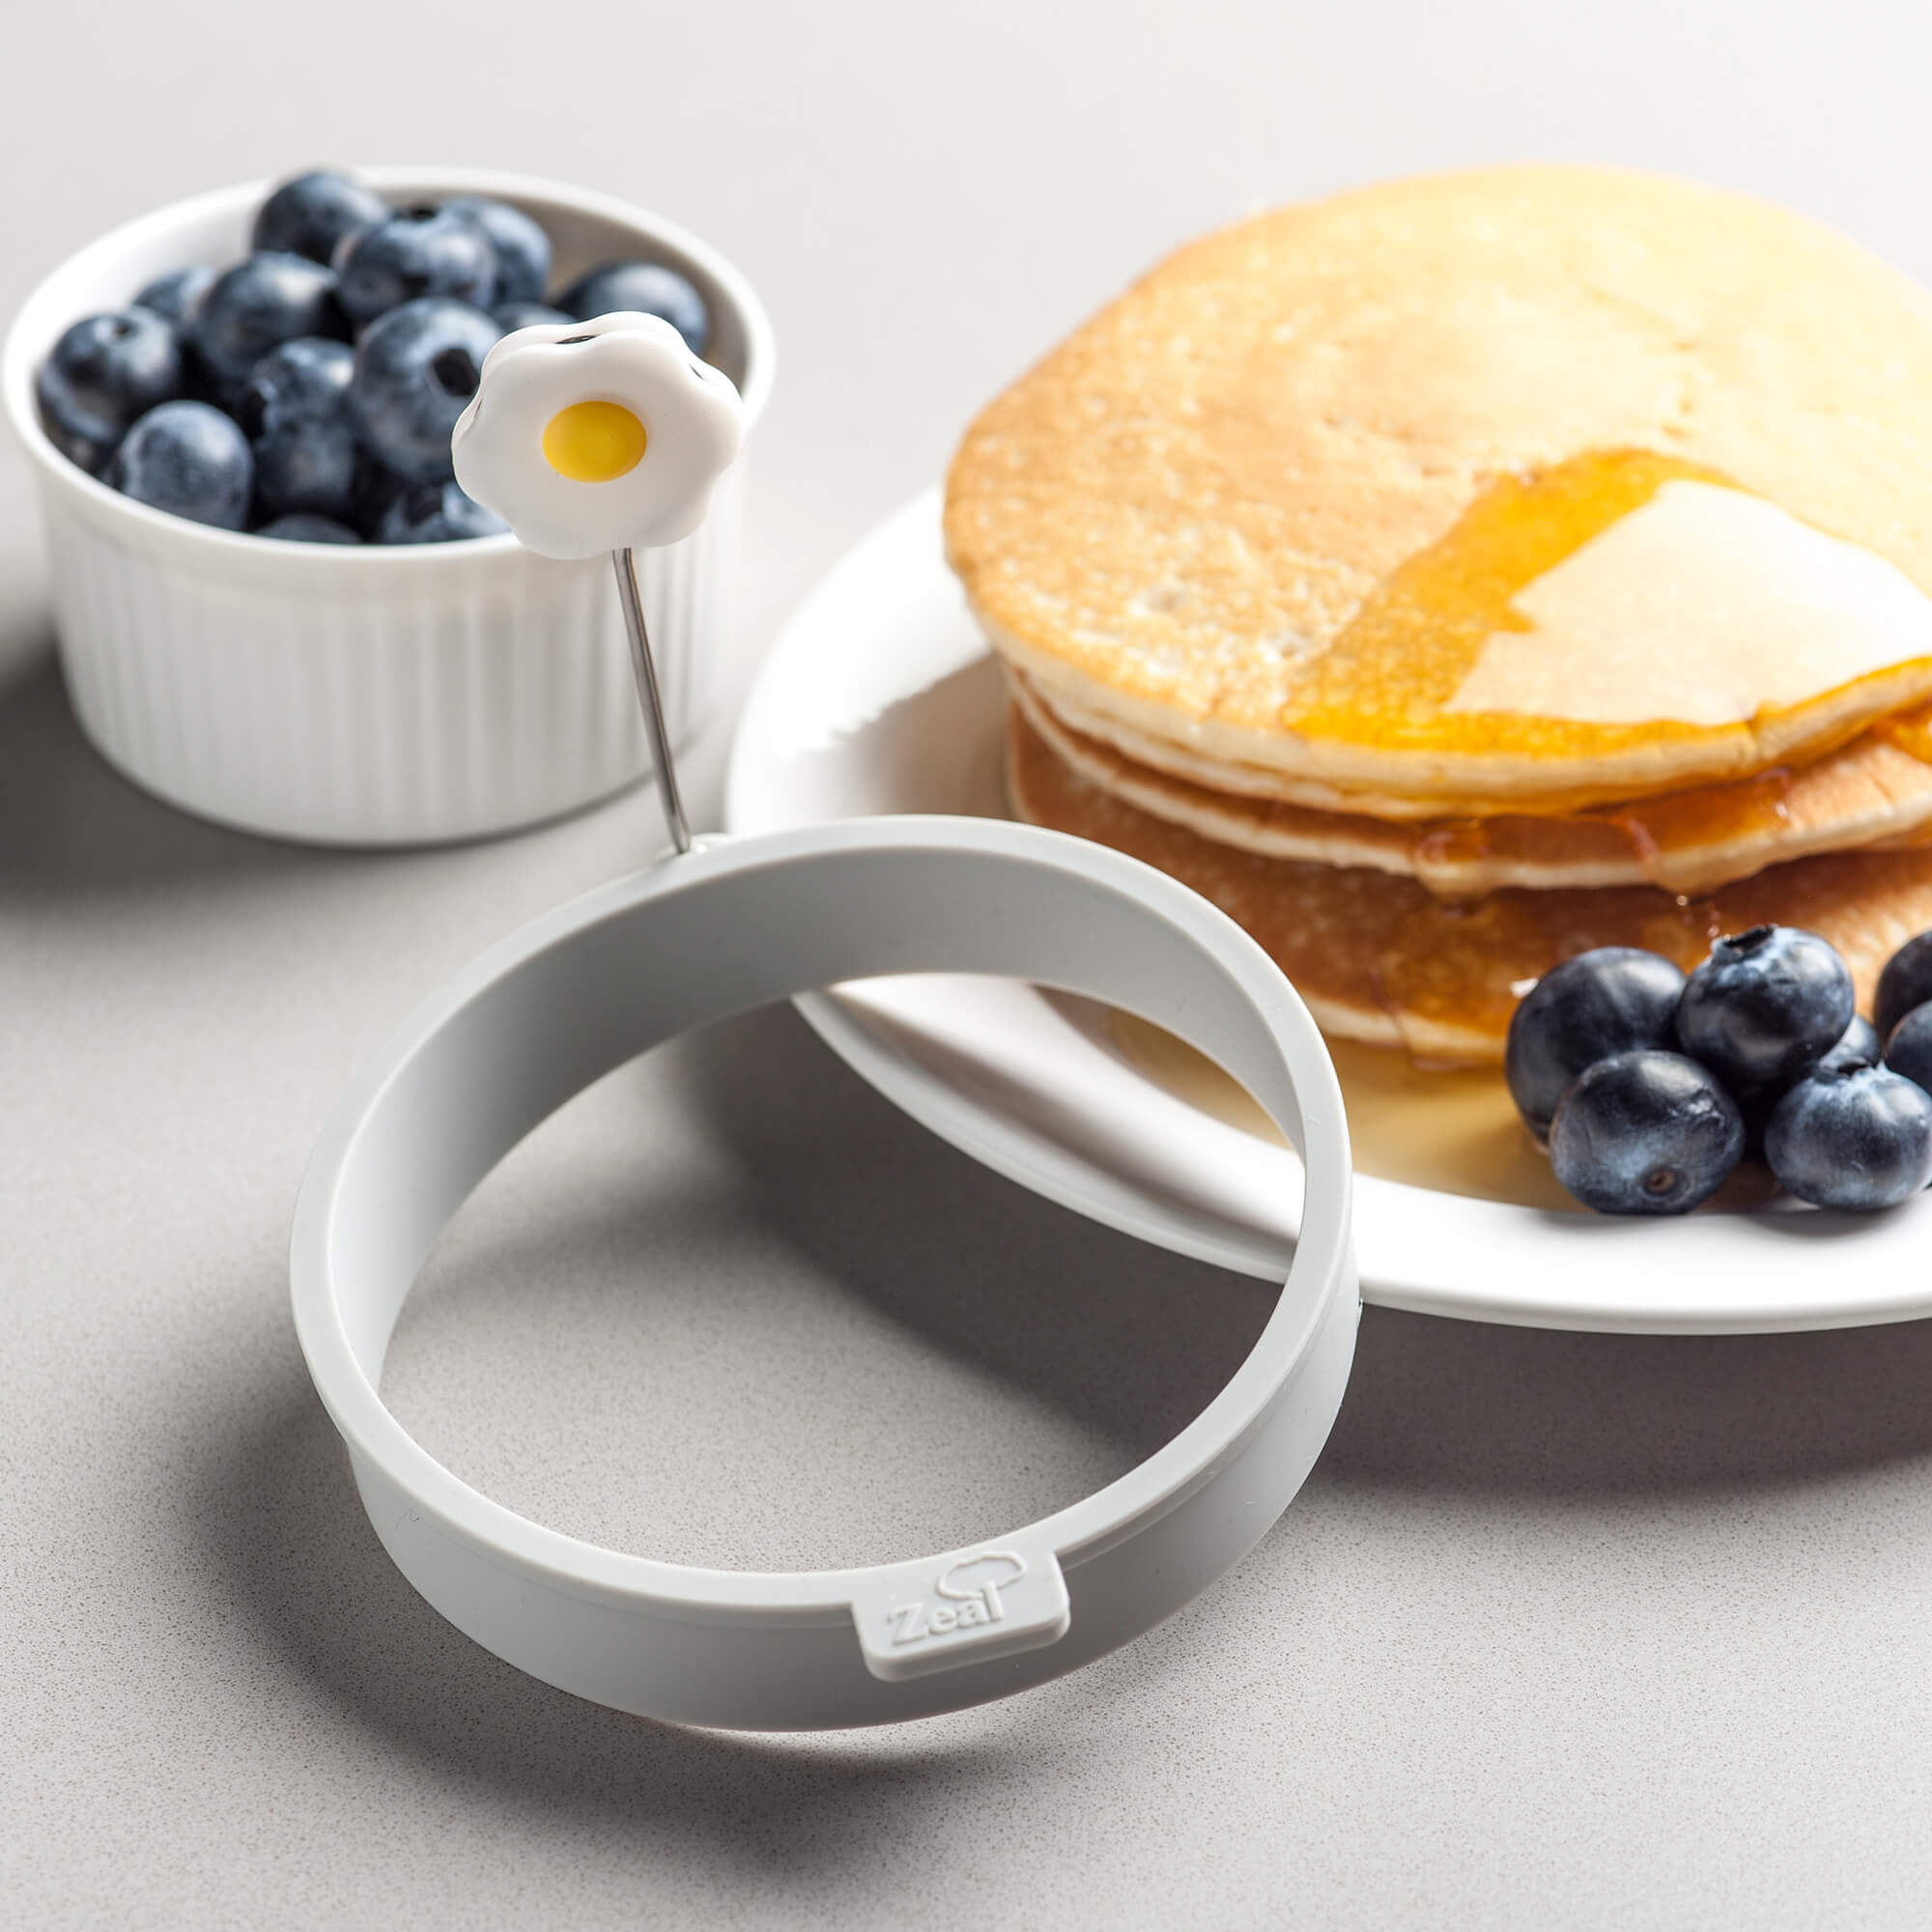 Creating perfect pancakes with the Zeal Silicone Egg Ring